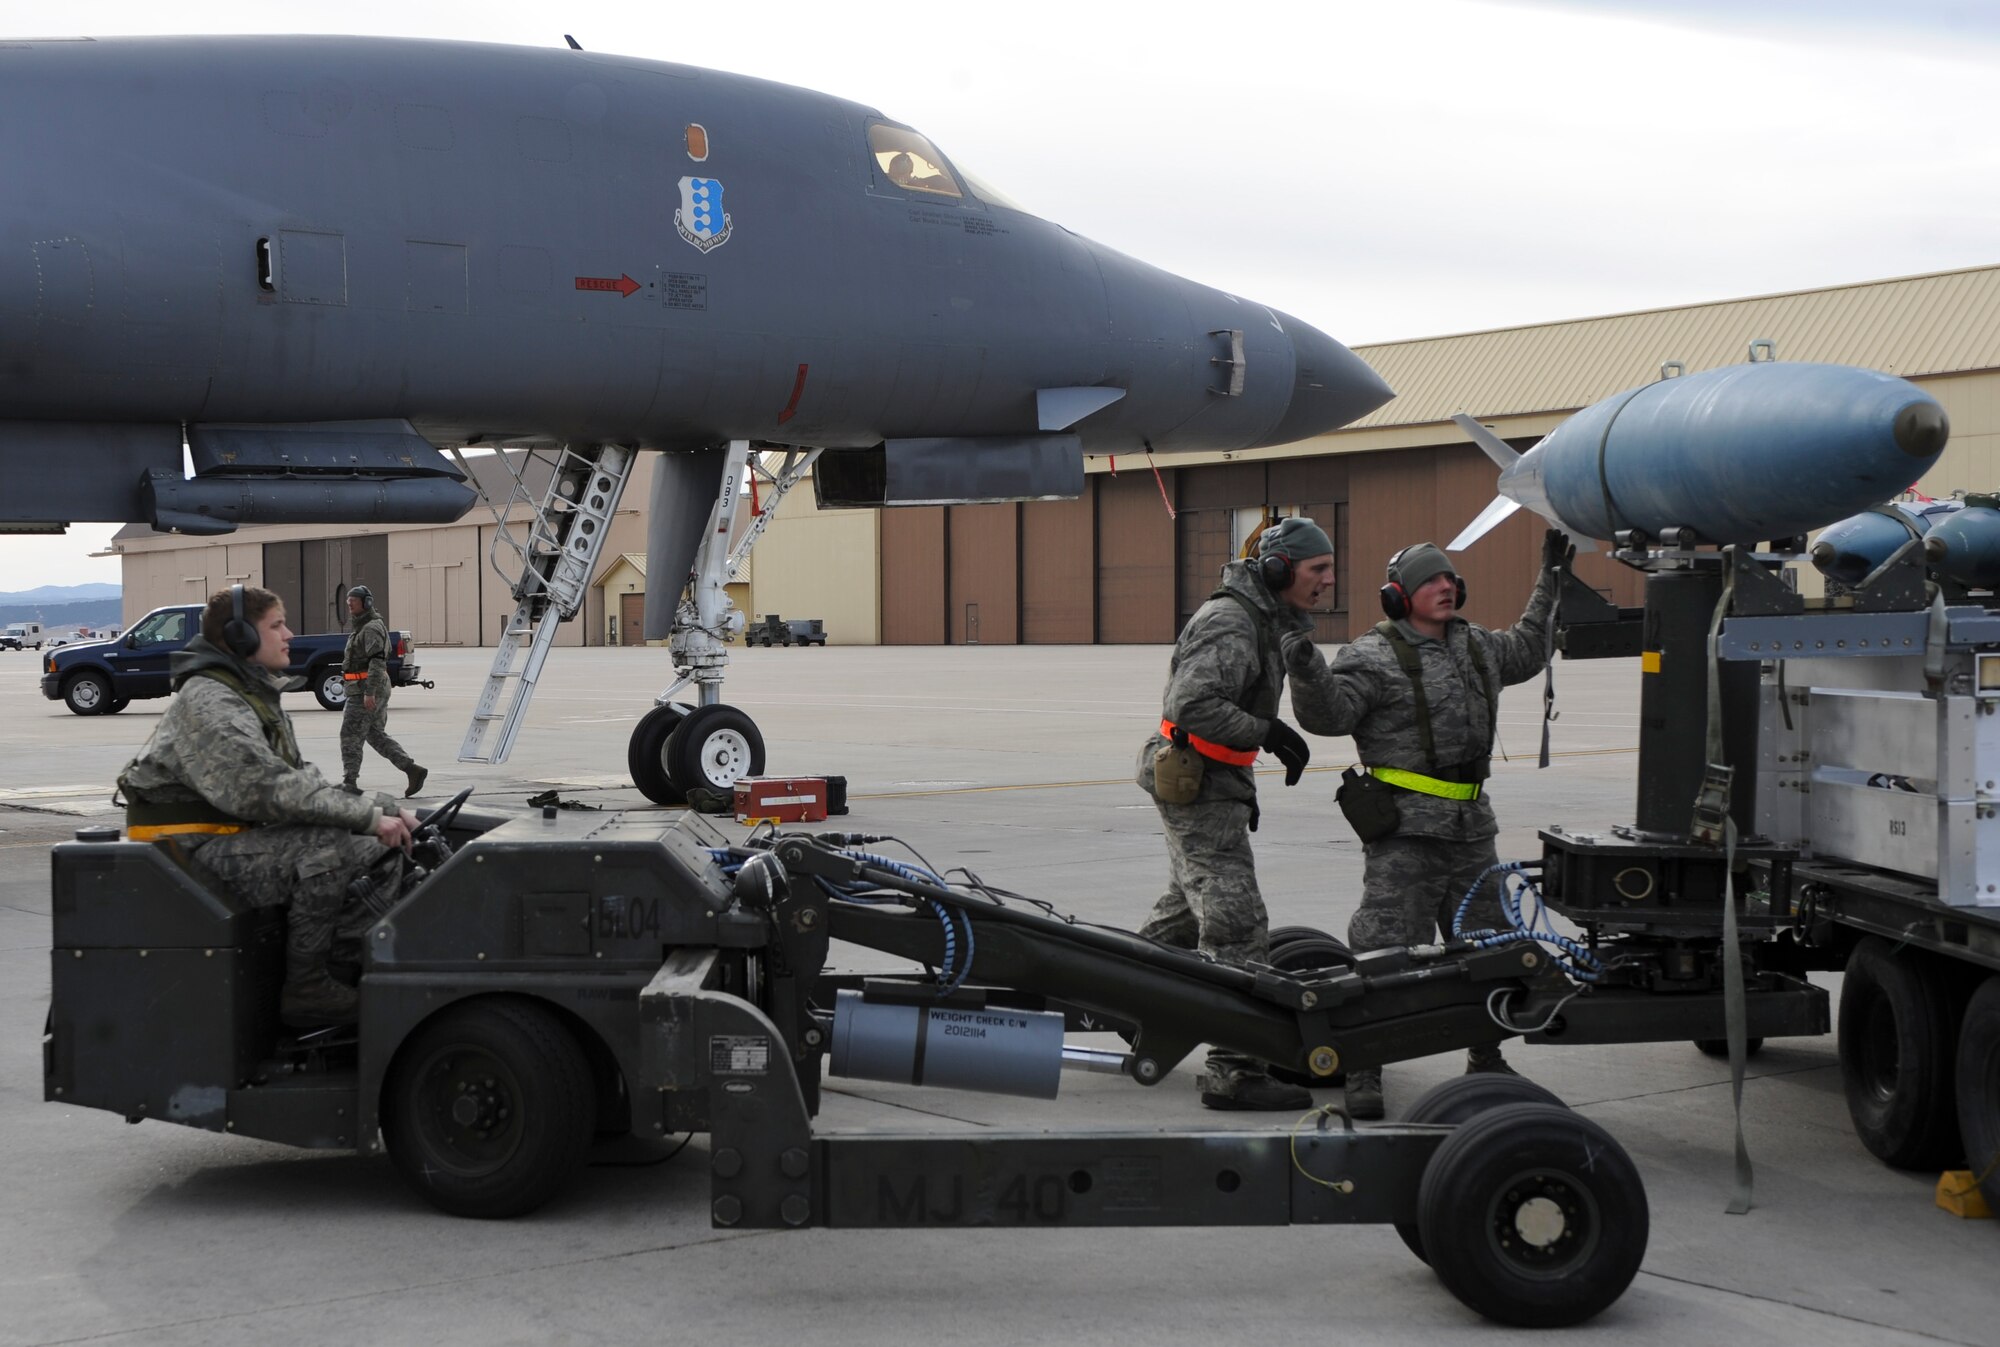 (From left to right) Senior Airman Stefen Ivanovic, Senior Airman Josh Jenkins and Airman 1st Class Caleb Burker, 28th Aircraft Maintenance Squadron weapons load crew members, unload munitions from a B-1 bomber during an Operational Readiness Exercise at Ellsworth Air Force Base, S.D., March 20, 2013. The ORE exercised a wide range of unit operations, and tested Airmen’s abilities to effectively deploy equipment, airmen and aircraft in response to global contingencies. (U.S. Air Force photo by Airman 1st Class Anania Tekurio/Released)